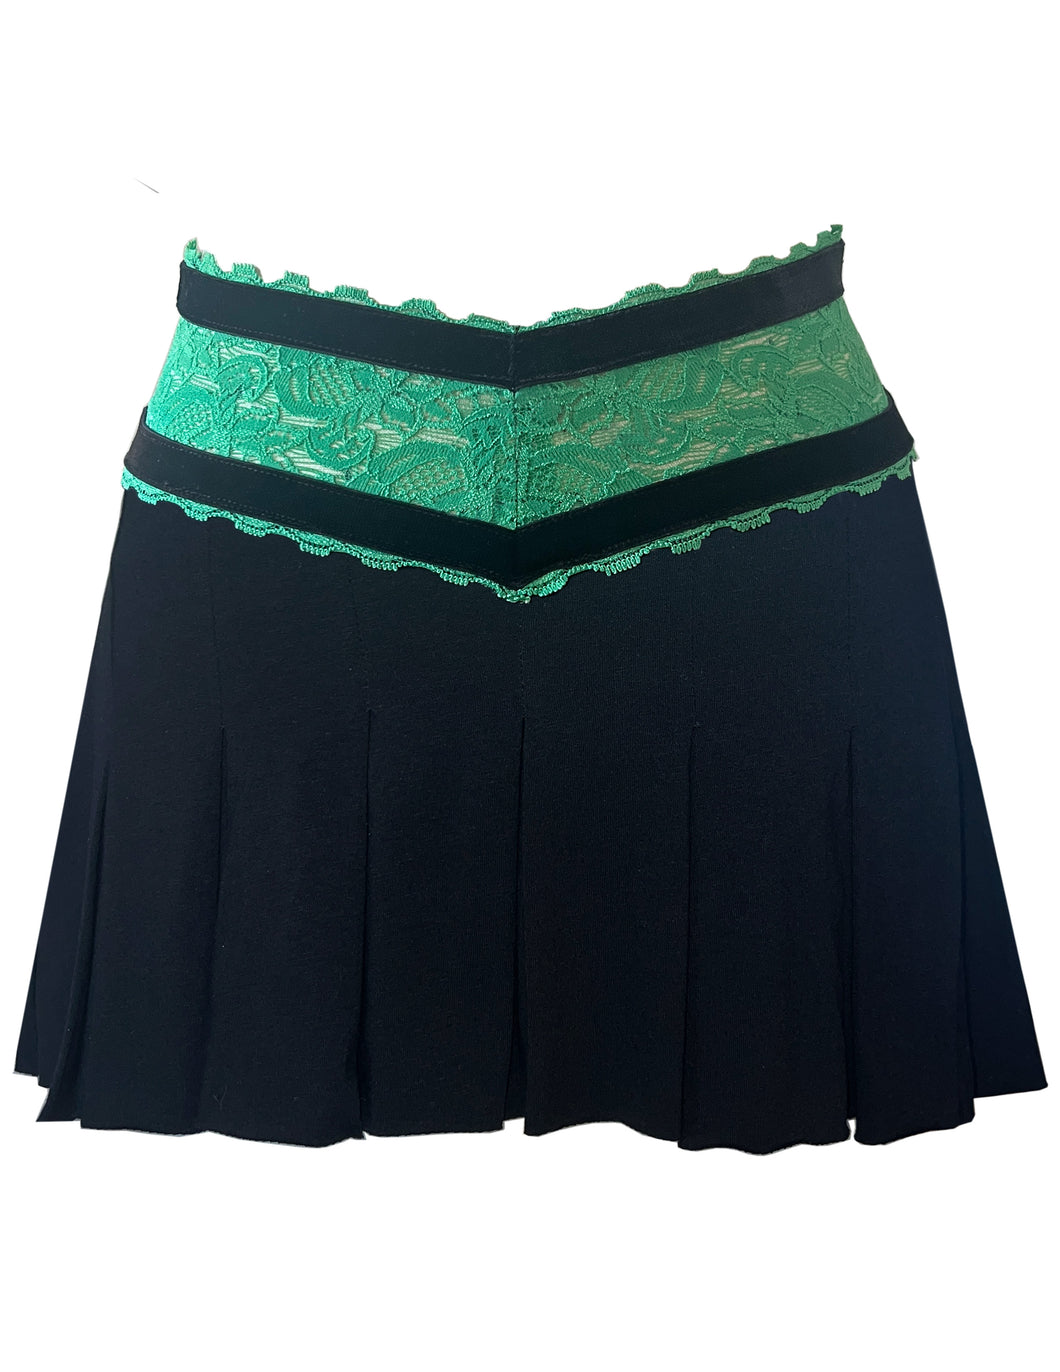 Cheer mini skirt with Green Lace